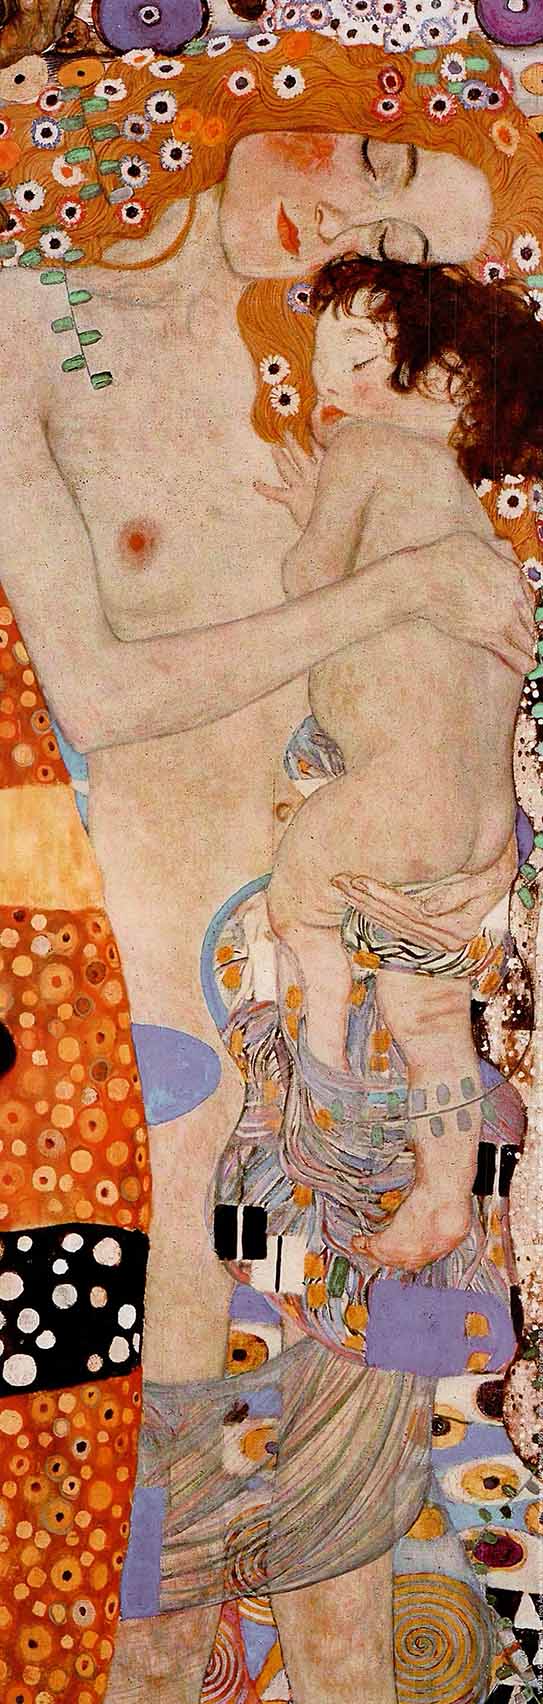 The Three Ages of Life (detail), 1905 by Gustav Klimt - 8 X 24 Inches (Art Print)